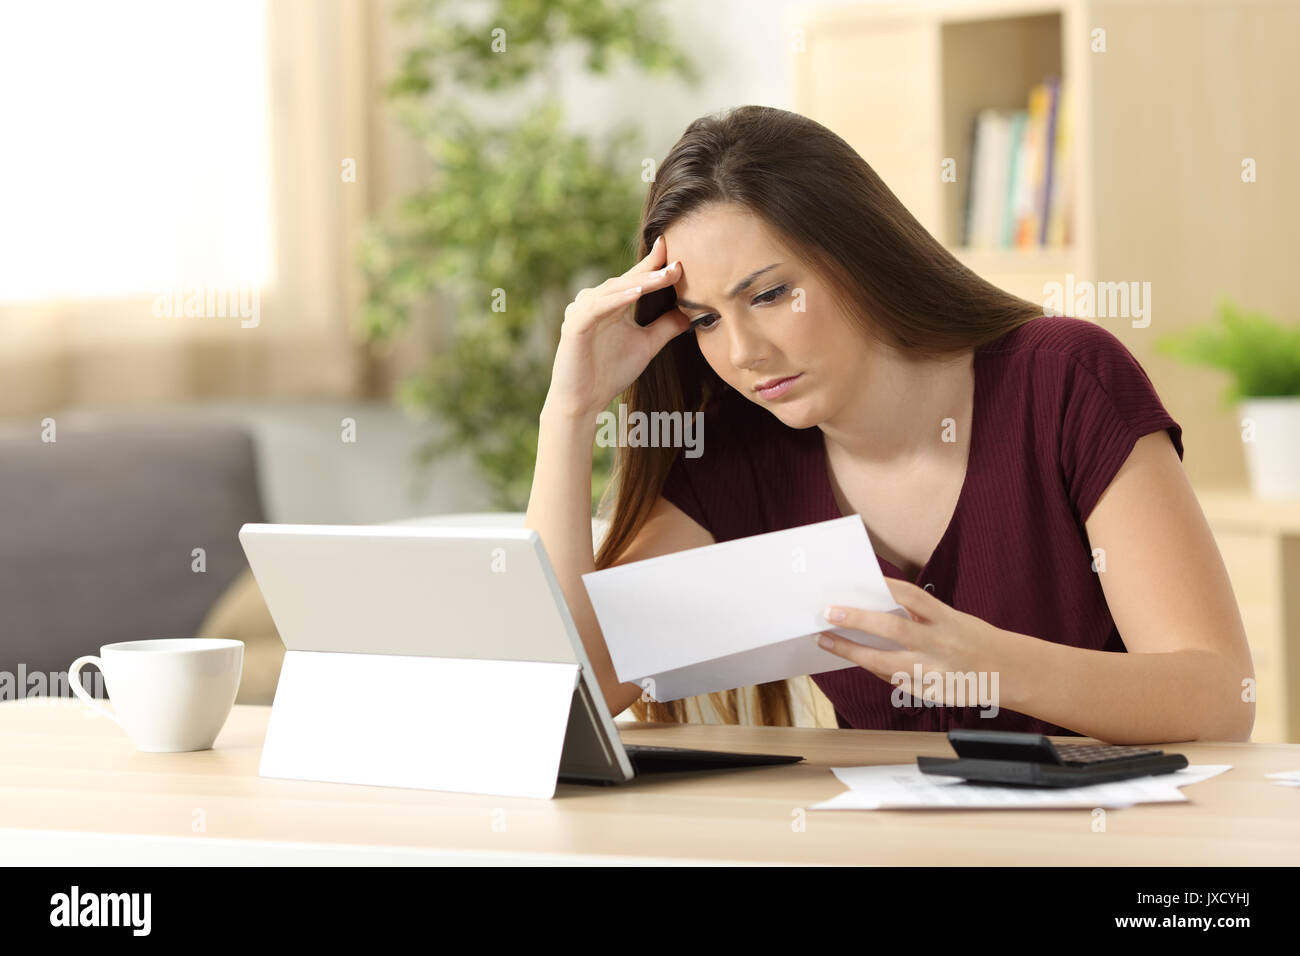 Worried woman calculating accountancy reading a letter sitting in a desk at home Stock Photo